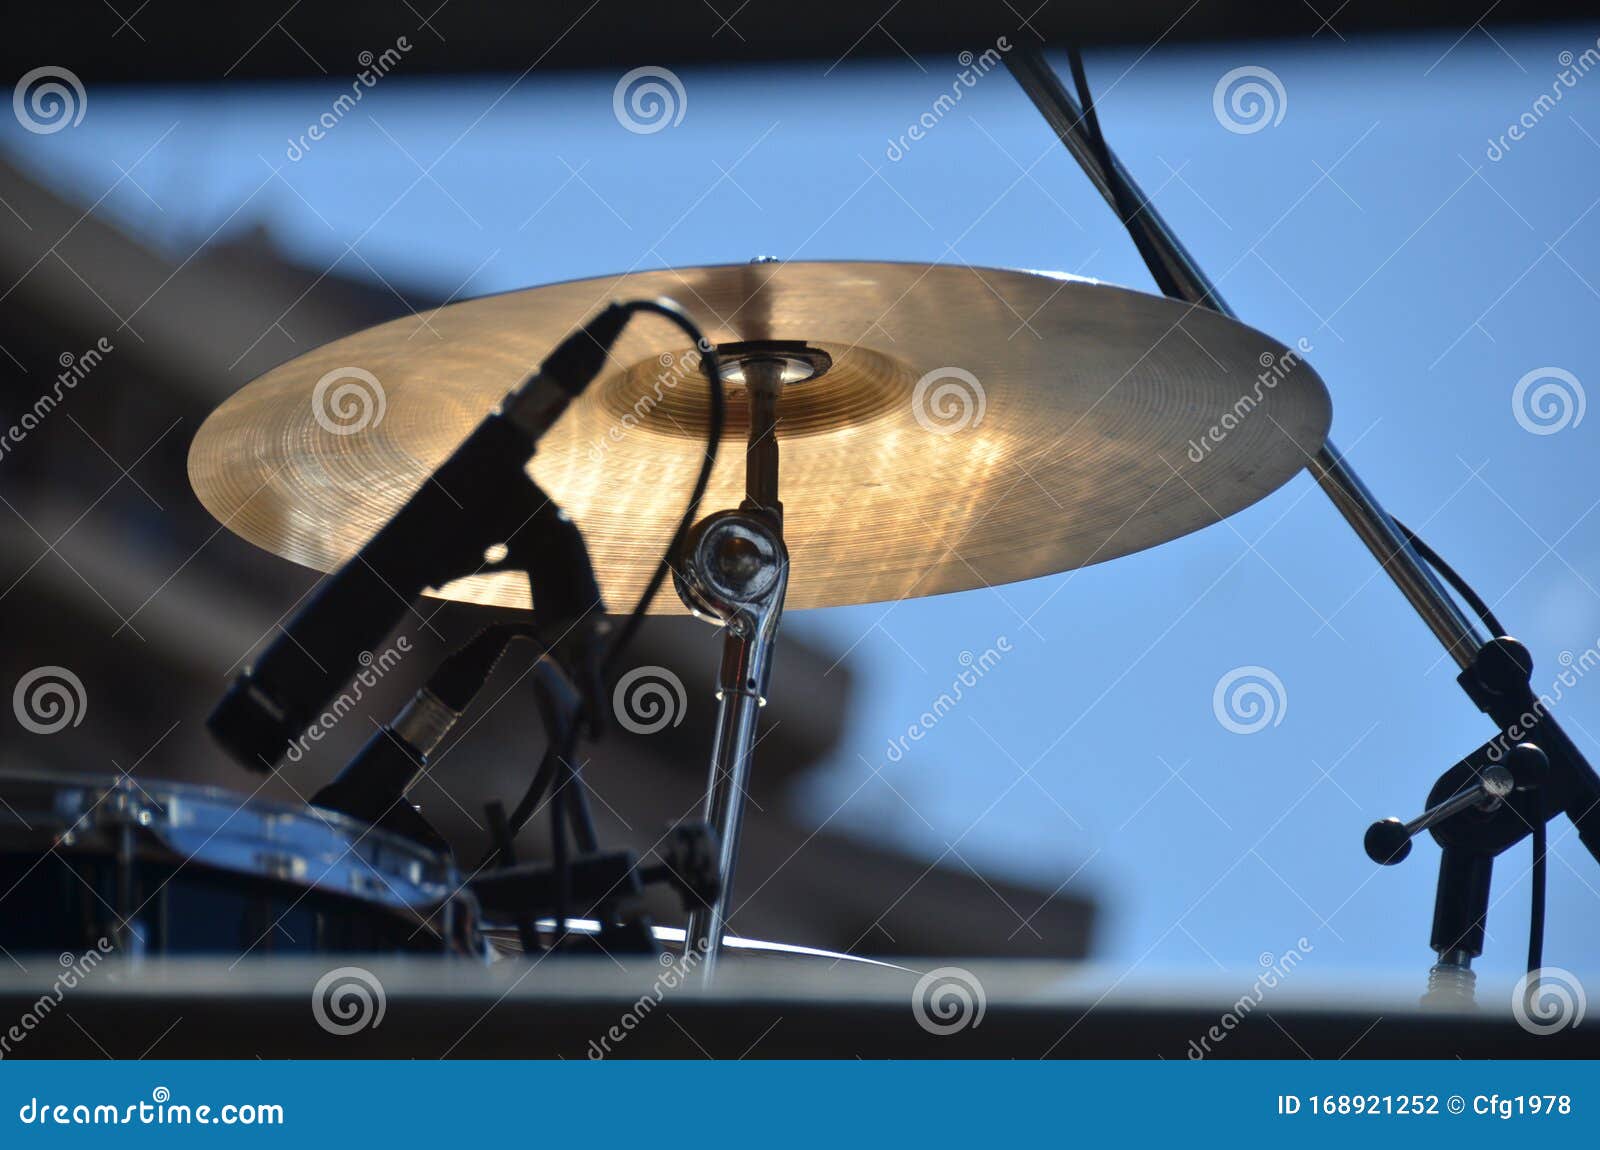 drum - cymbal and microphone photography - platillo de bateria